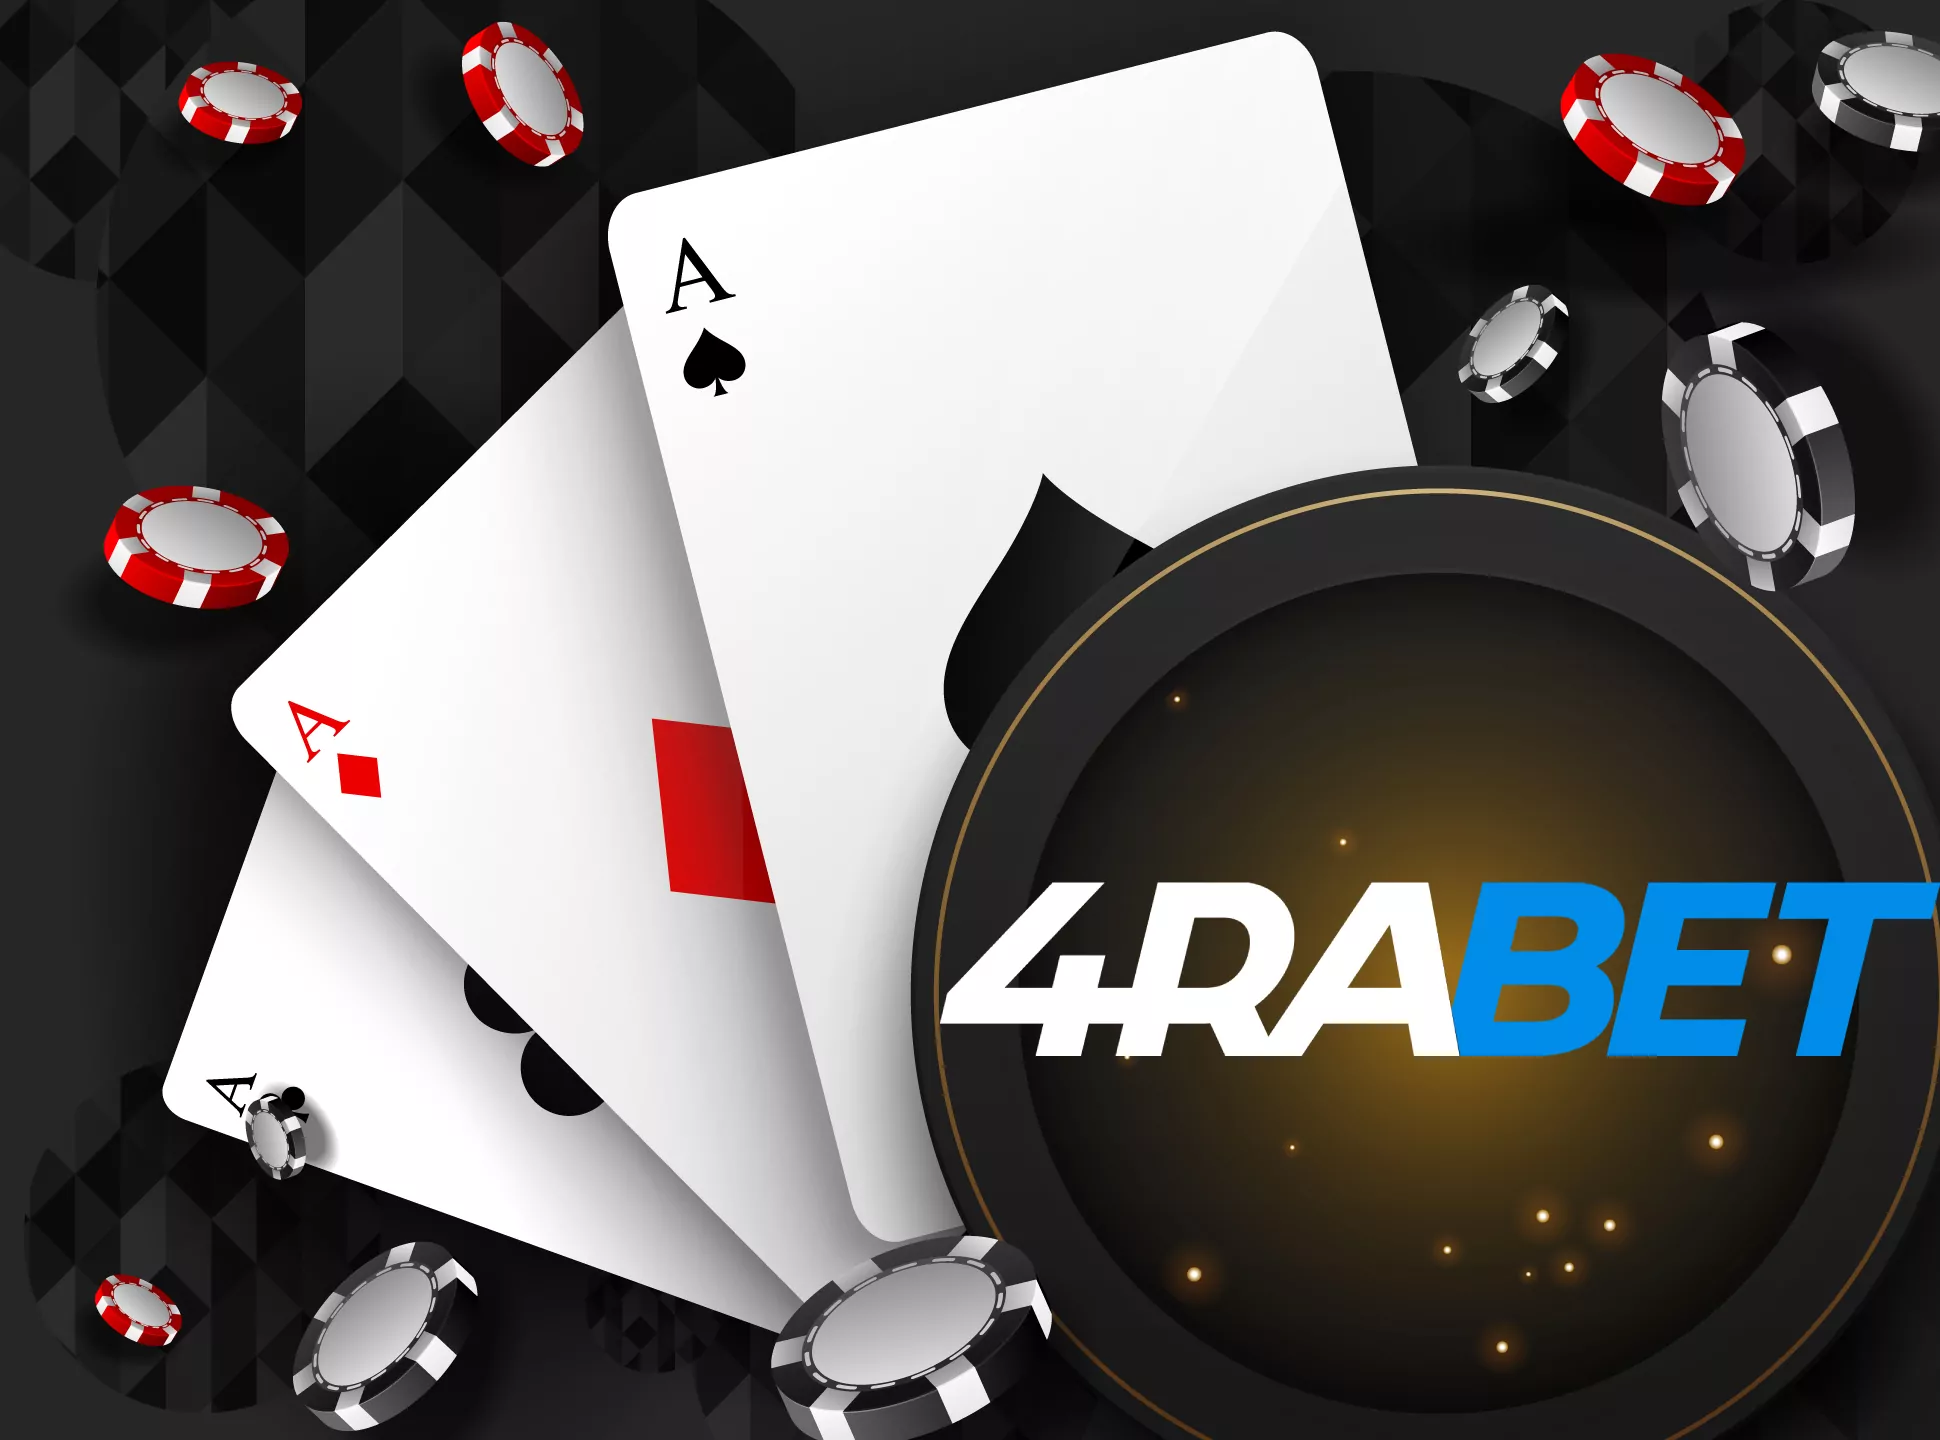 Sign up for the 4rabet online casino and start playing.